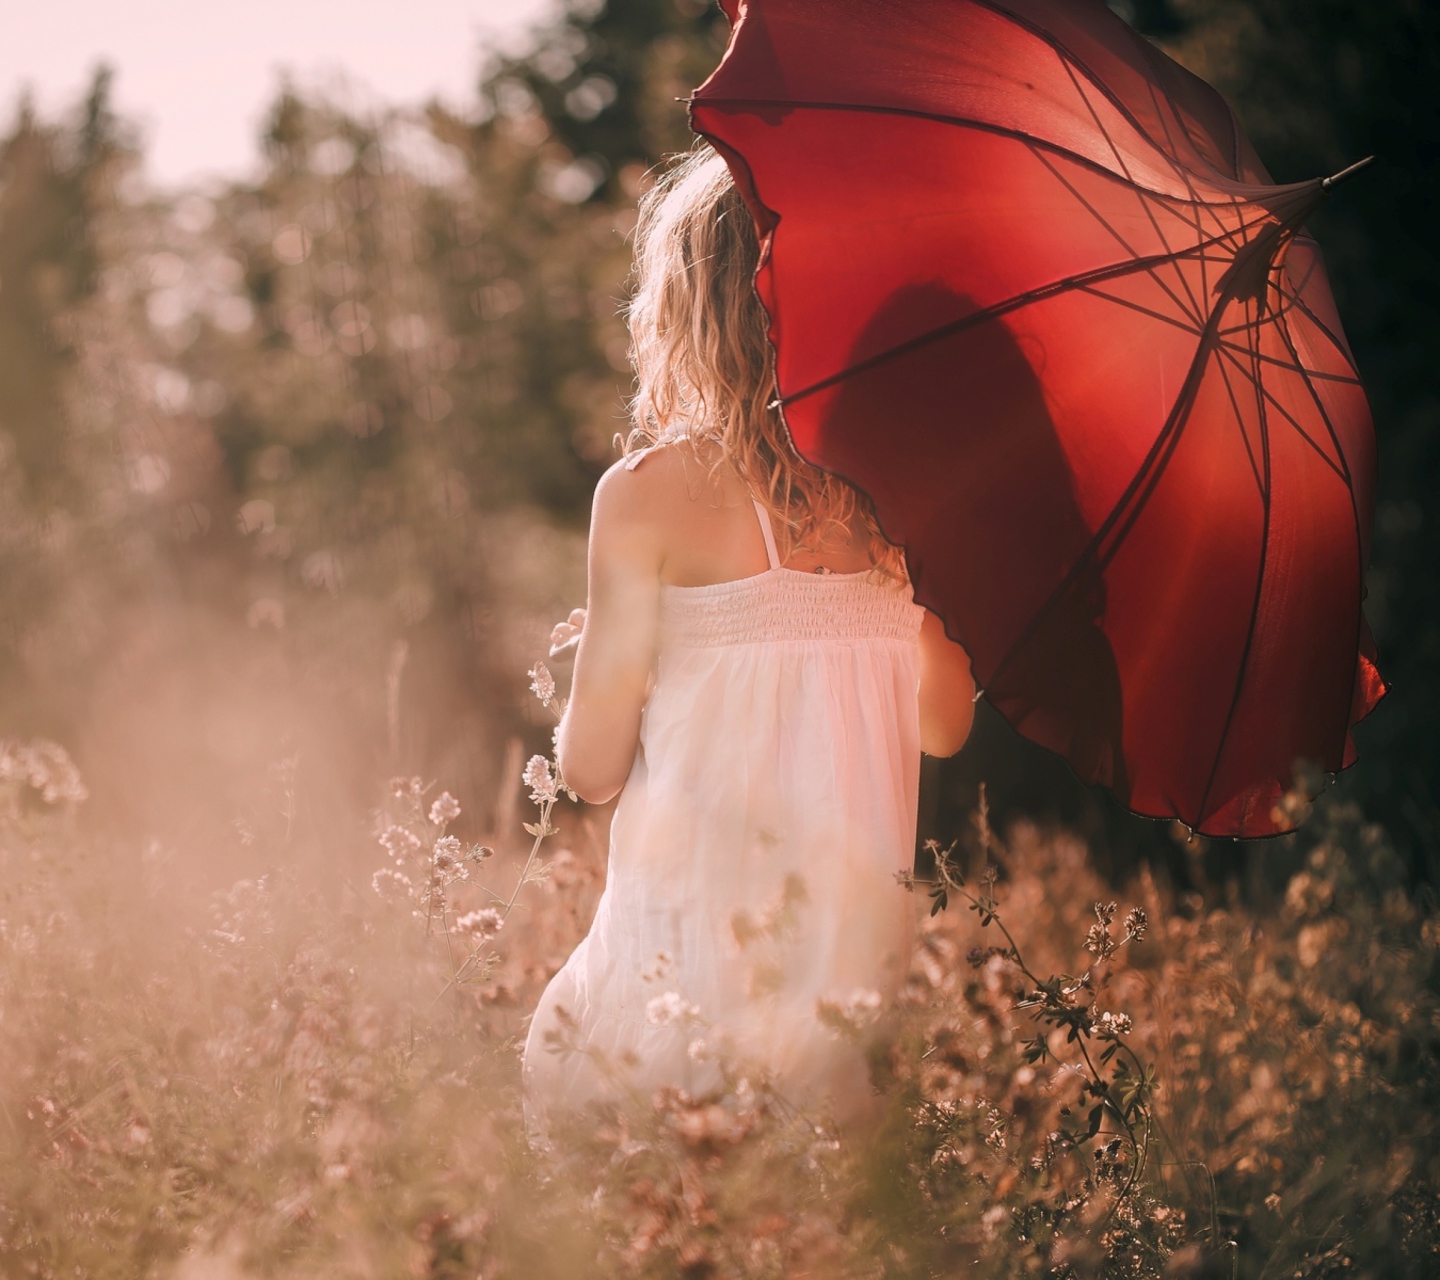 Girl With Red Umbrella wallpaper 1440x1280